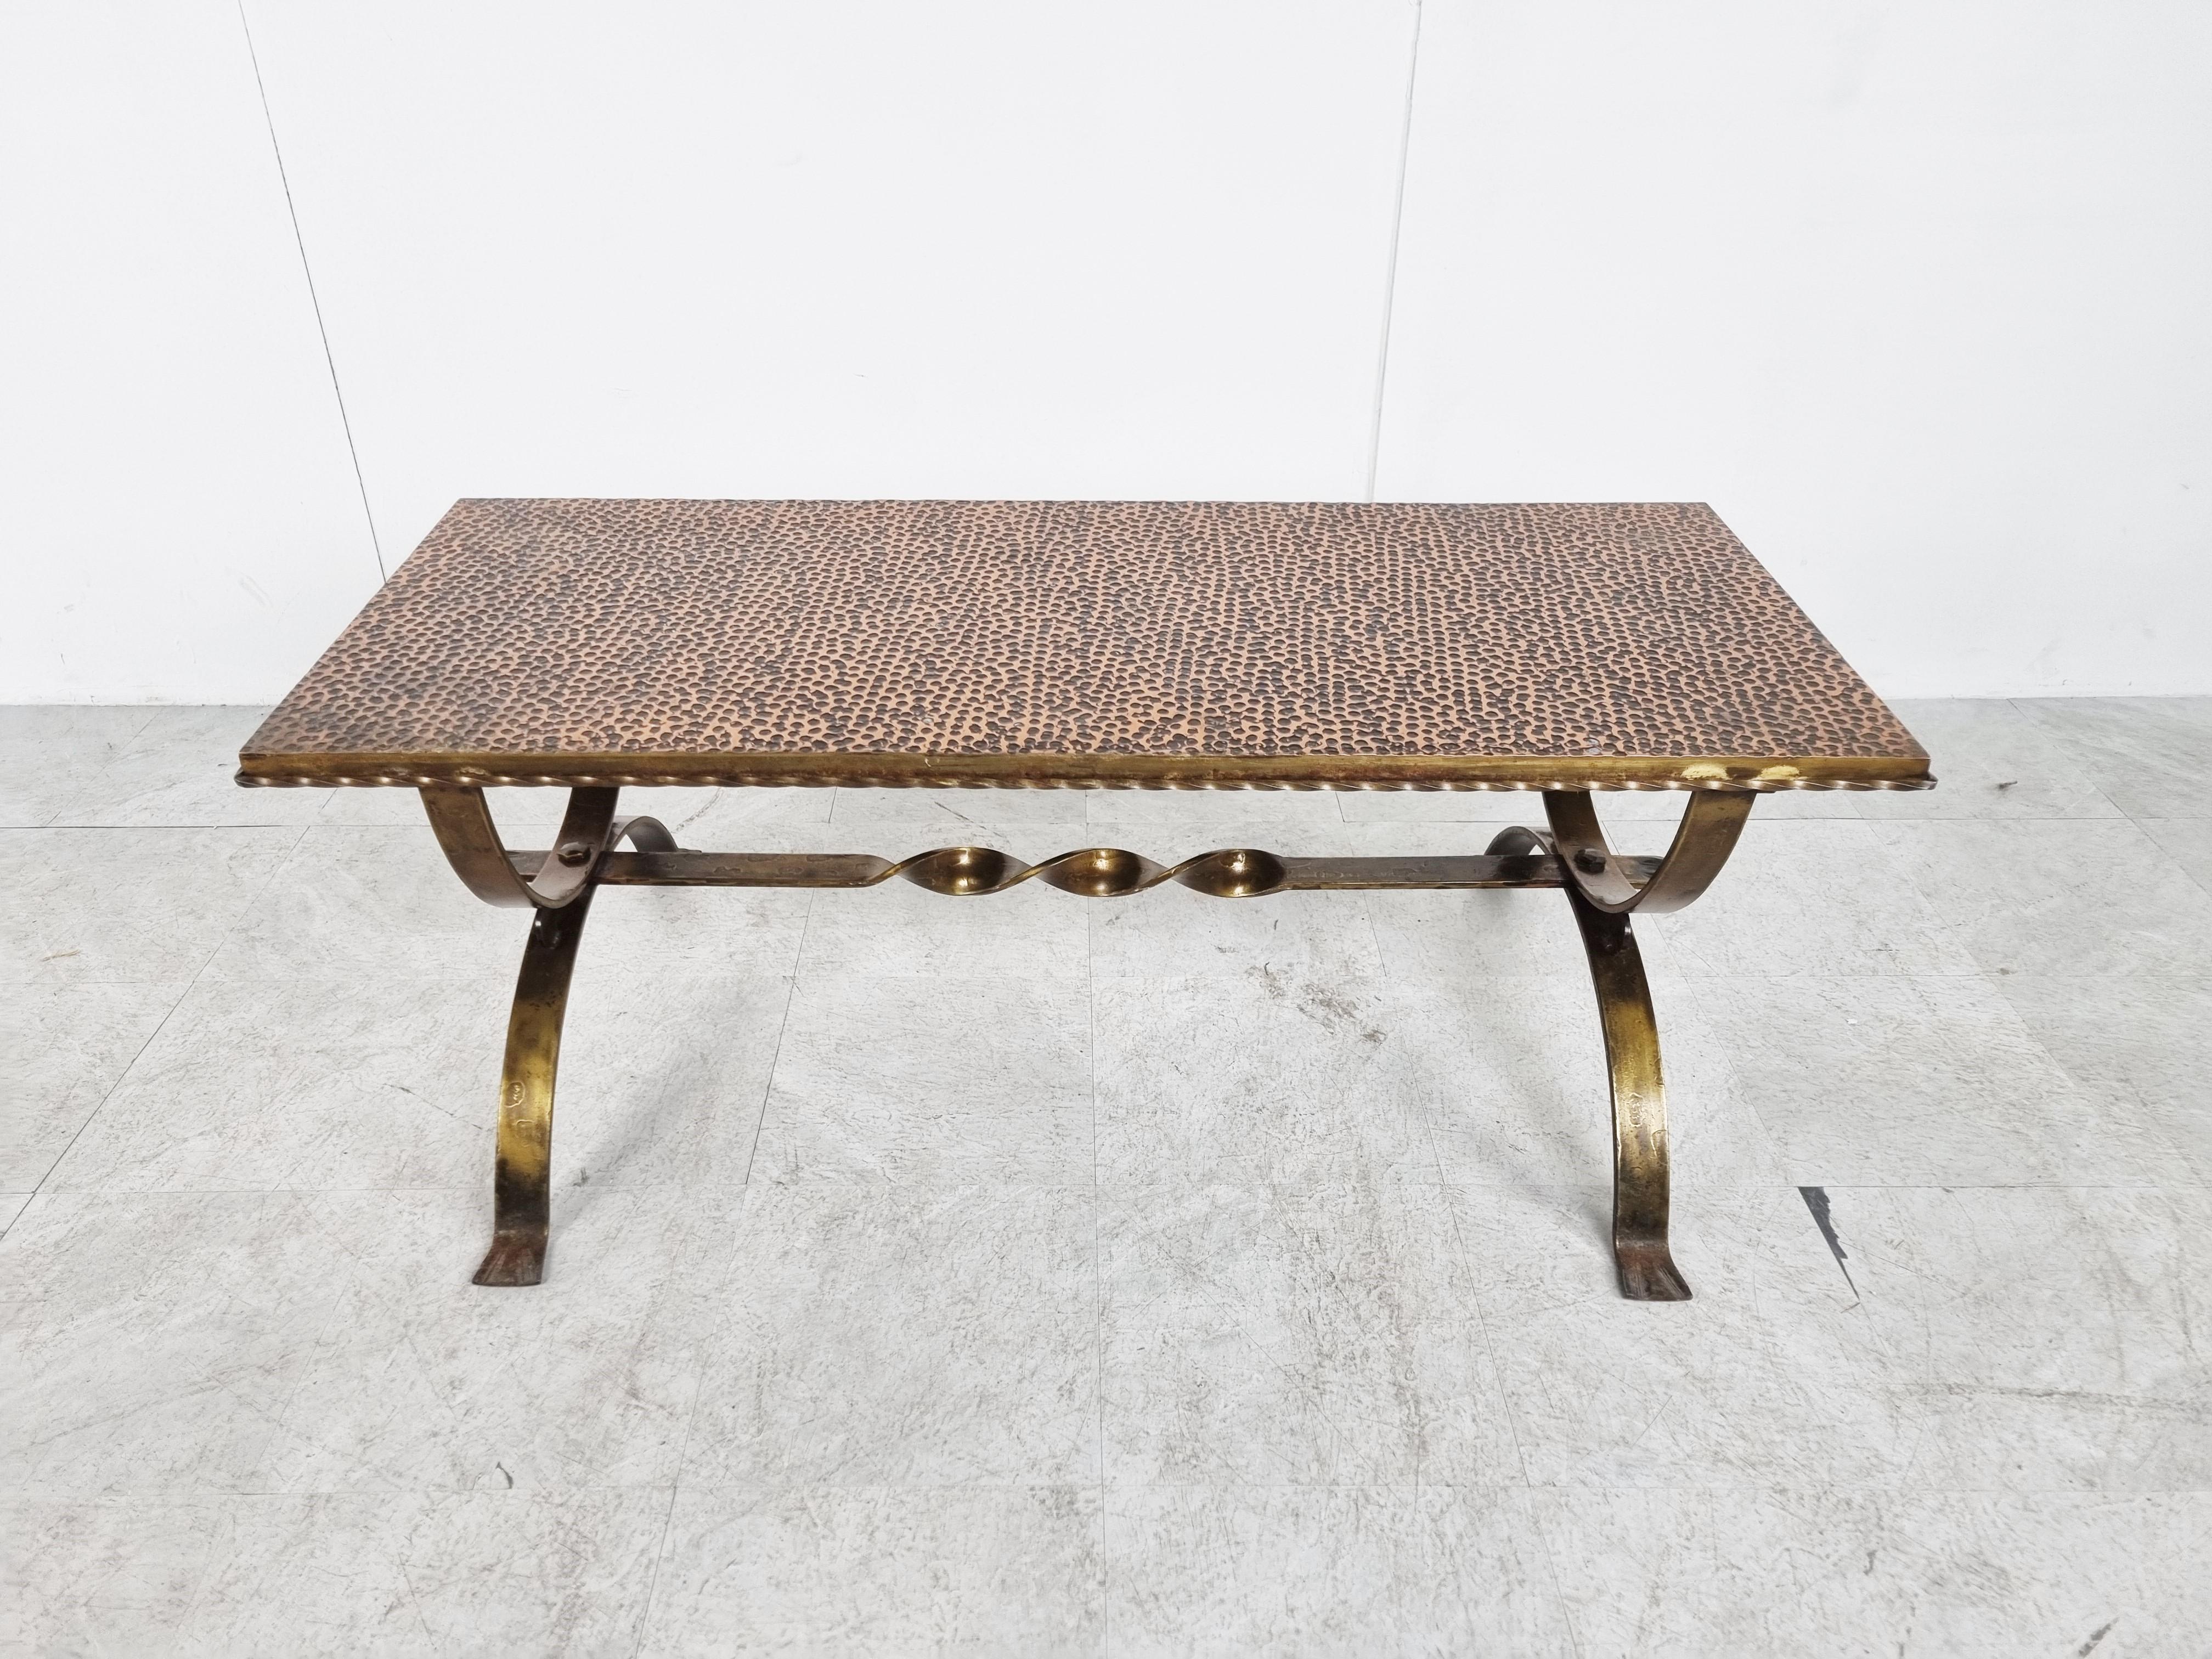 Exquisite mid century gilded wrought iron coffee table in the style of Raymond Subes.

Beautifully crafted base with a contrasting copper relief top.

The combination of materials and craftsmanship creates this beautiful elegant coffee